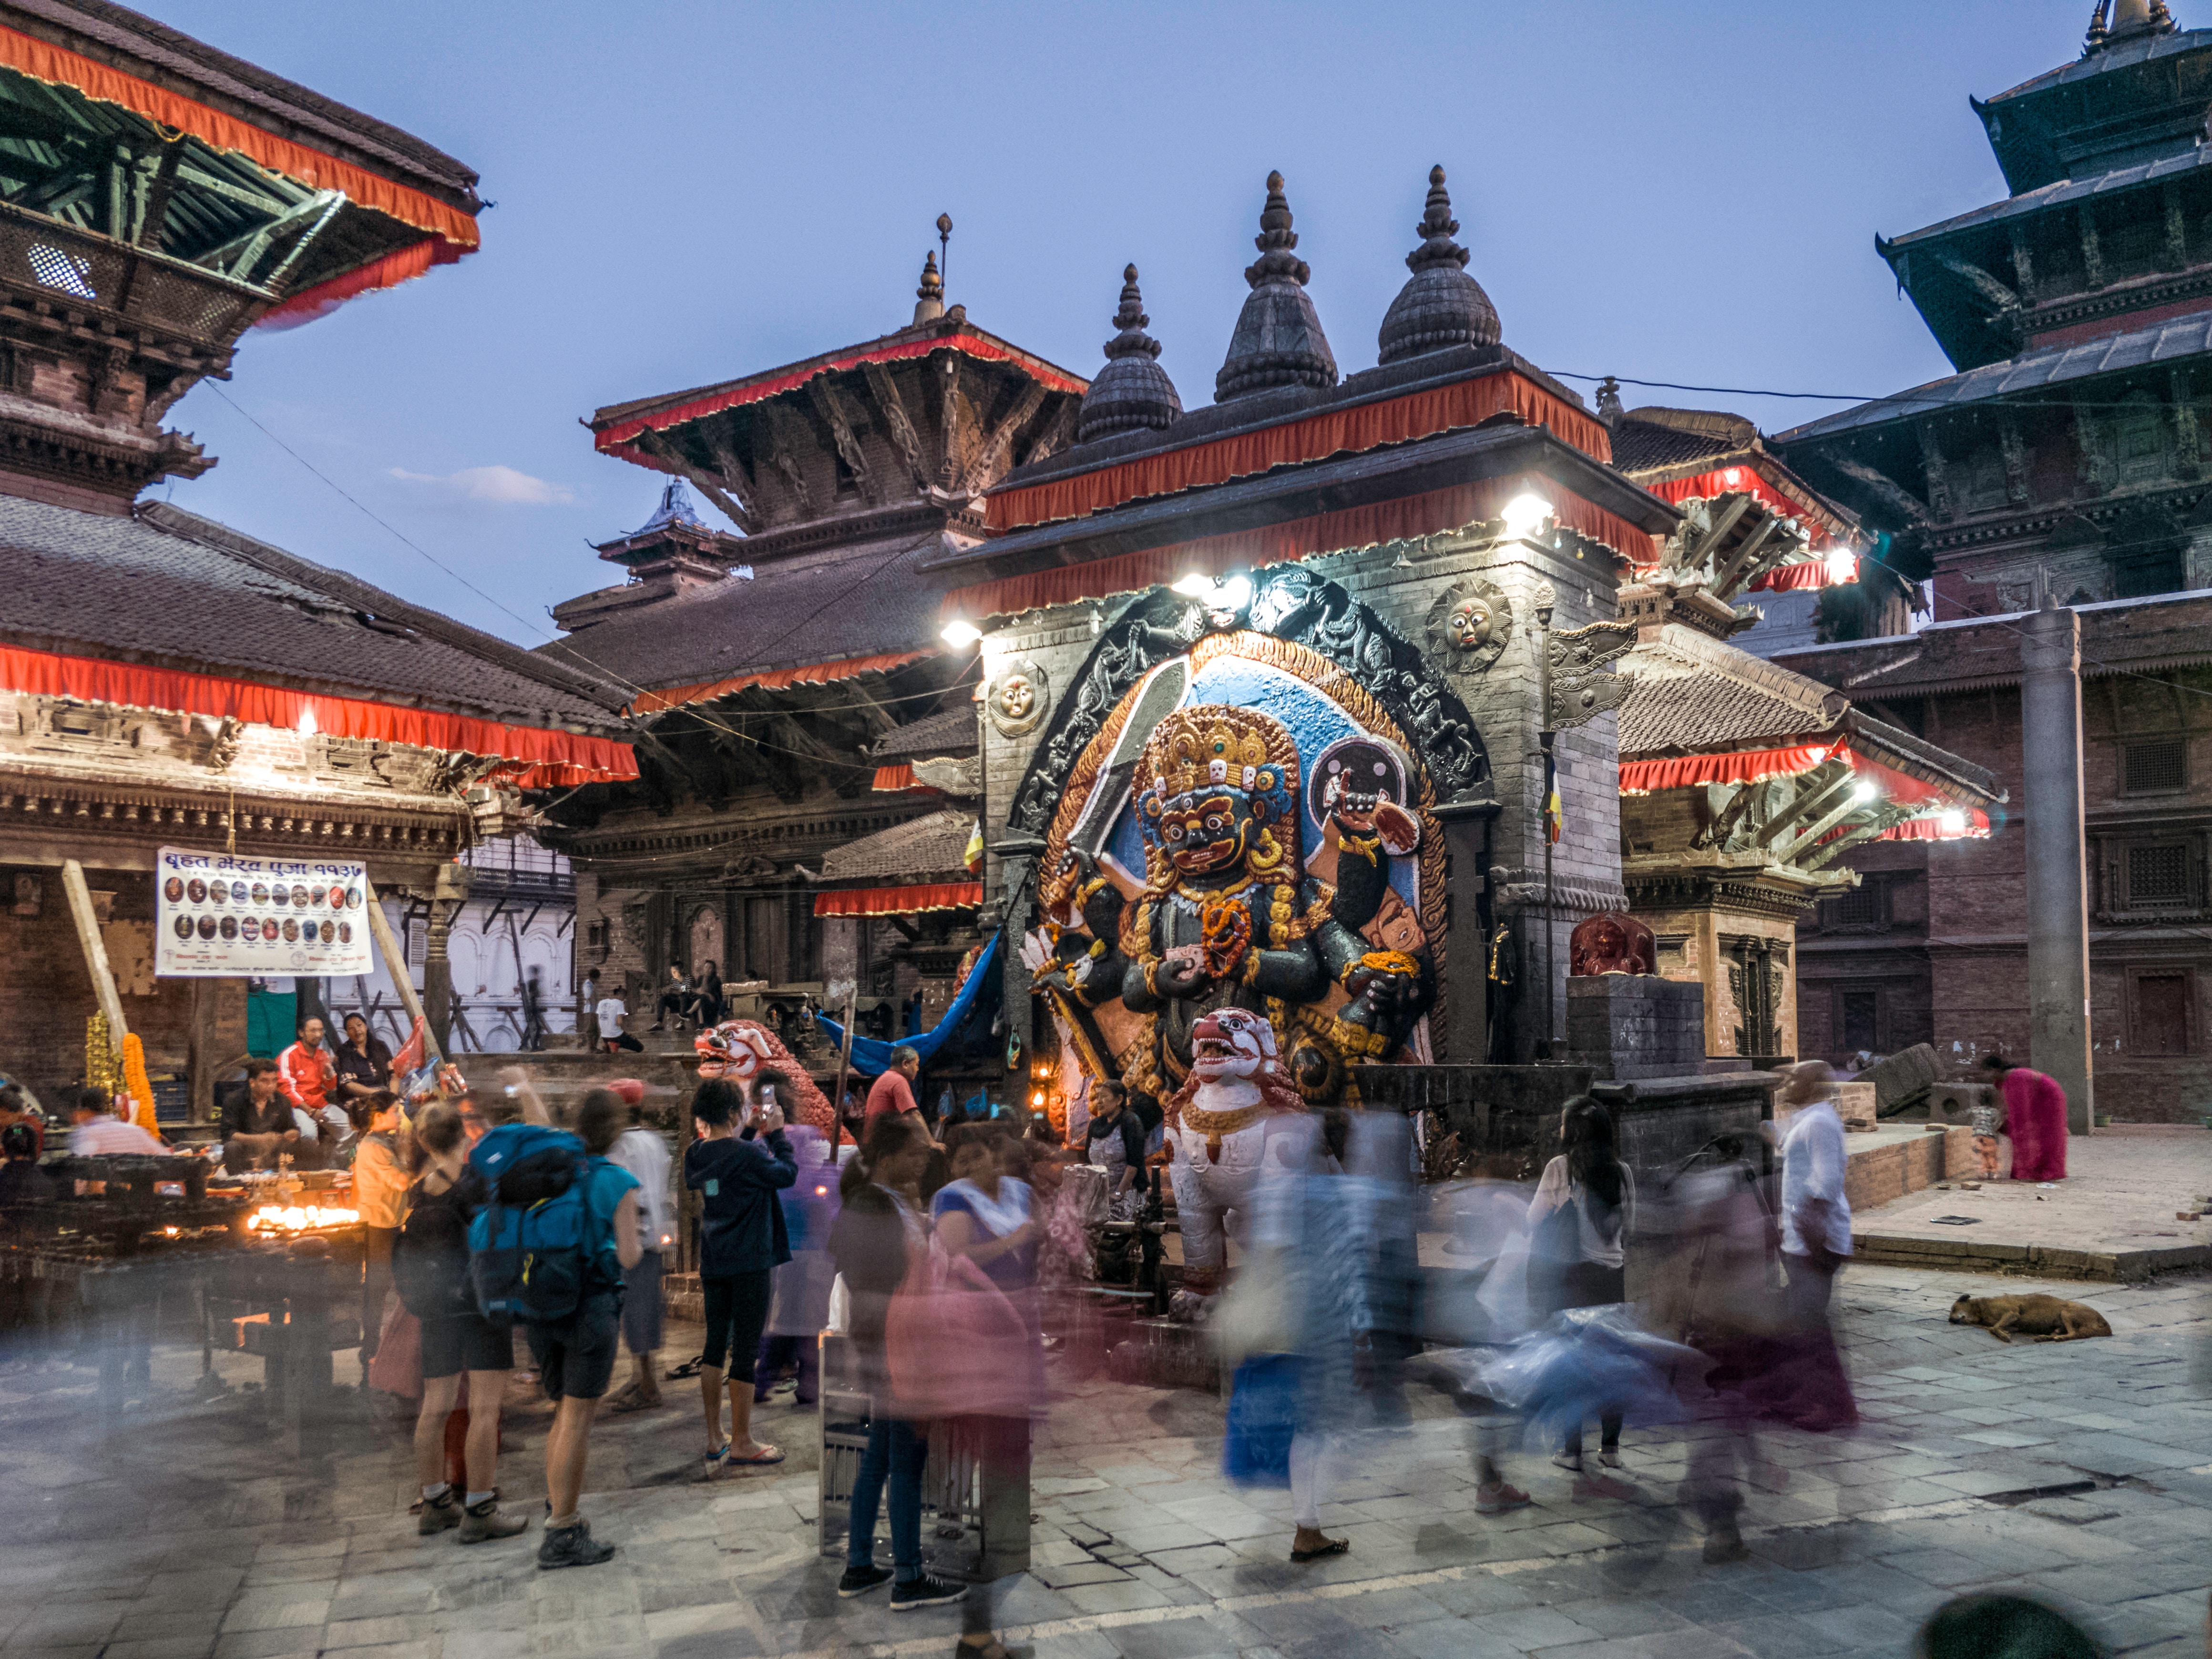 The guardians of the valley: 10 Bhairavs of Kathmandu valley that keep people safe